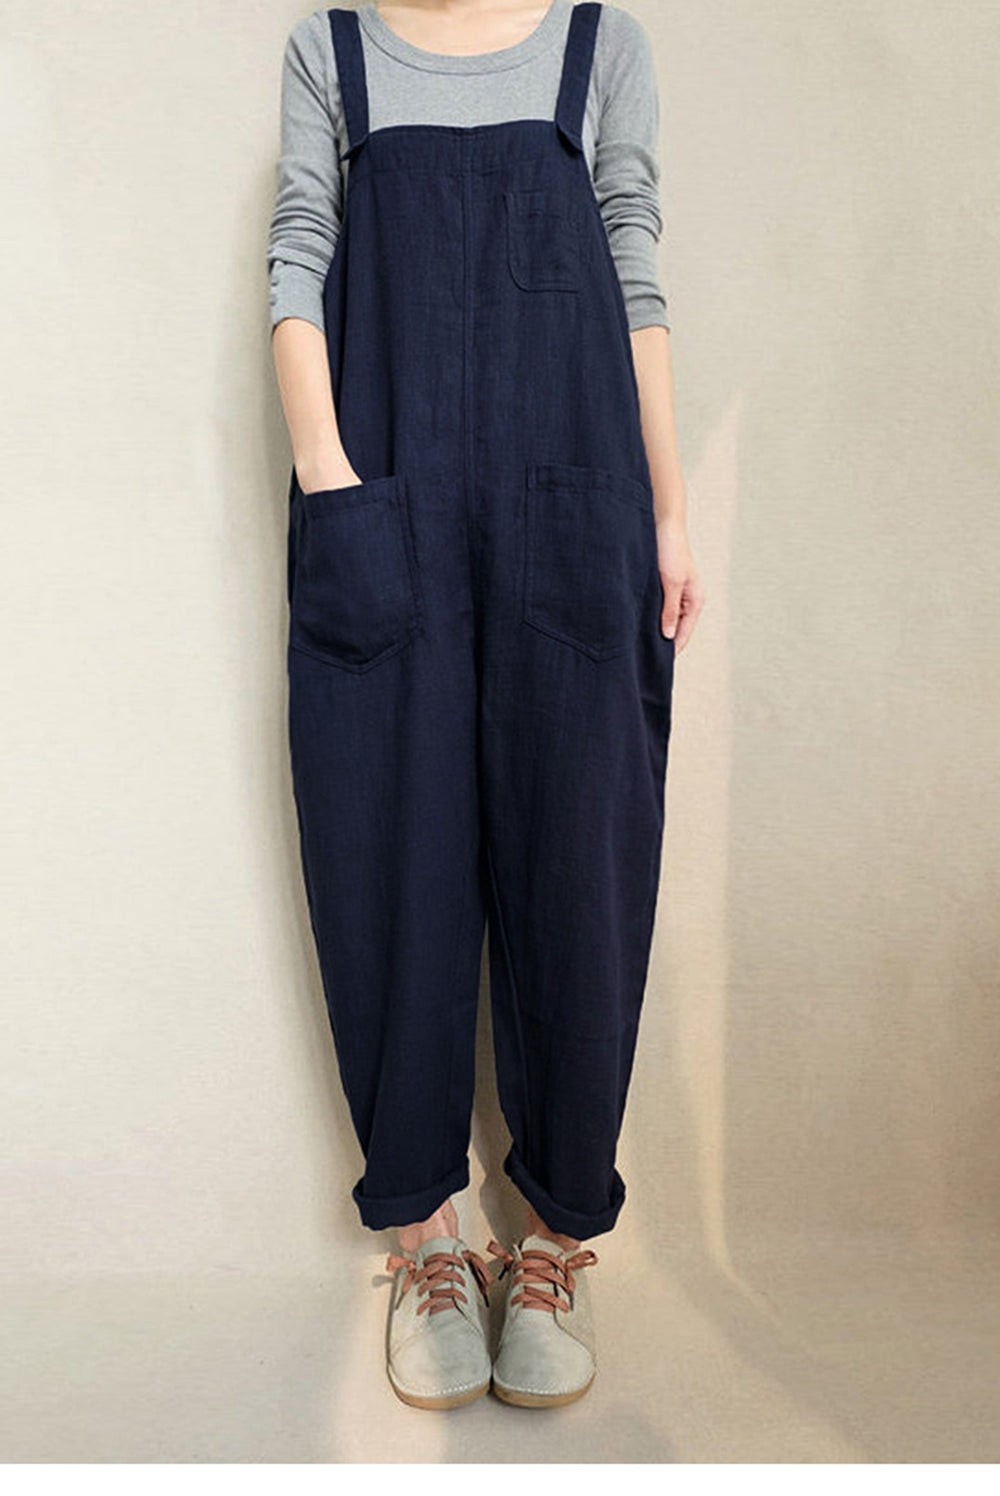 Women Casual Linen Jumpsuits Overalls Pants With Pockets Vintage